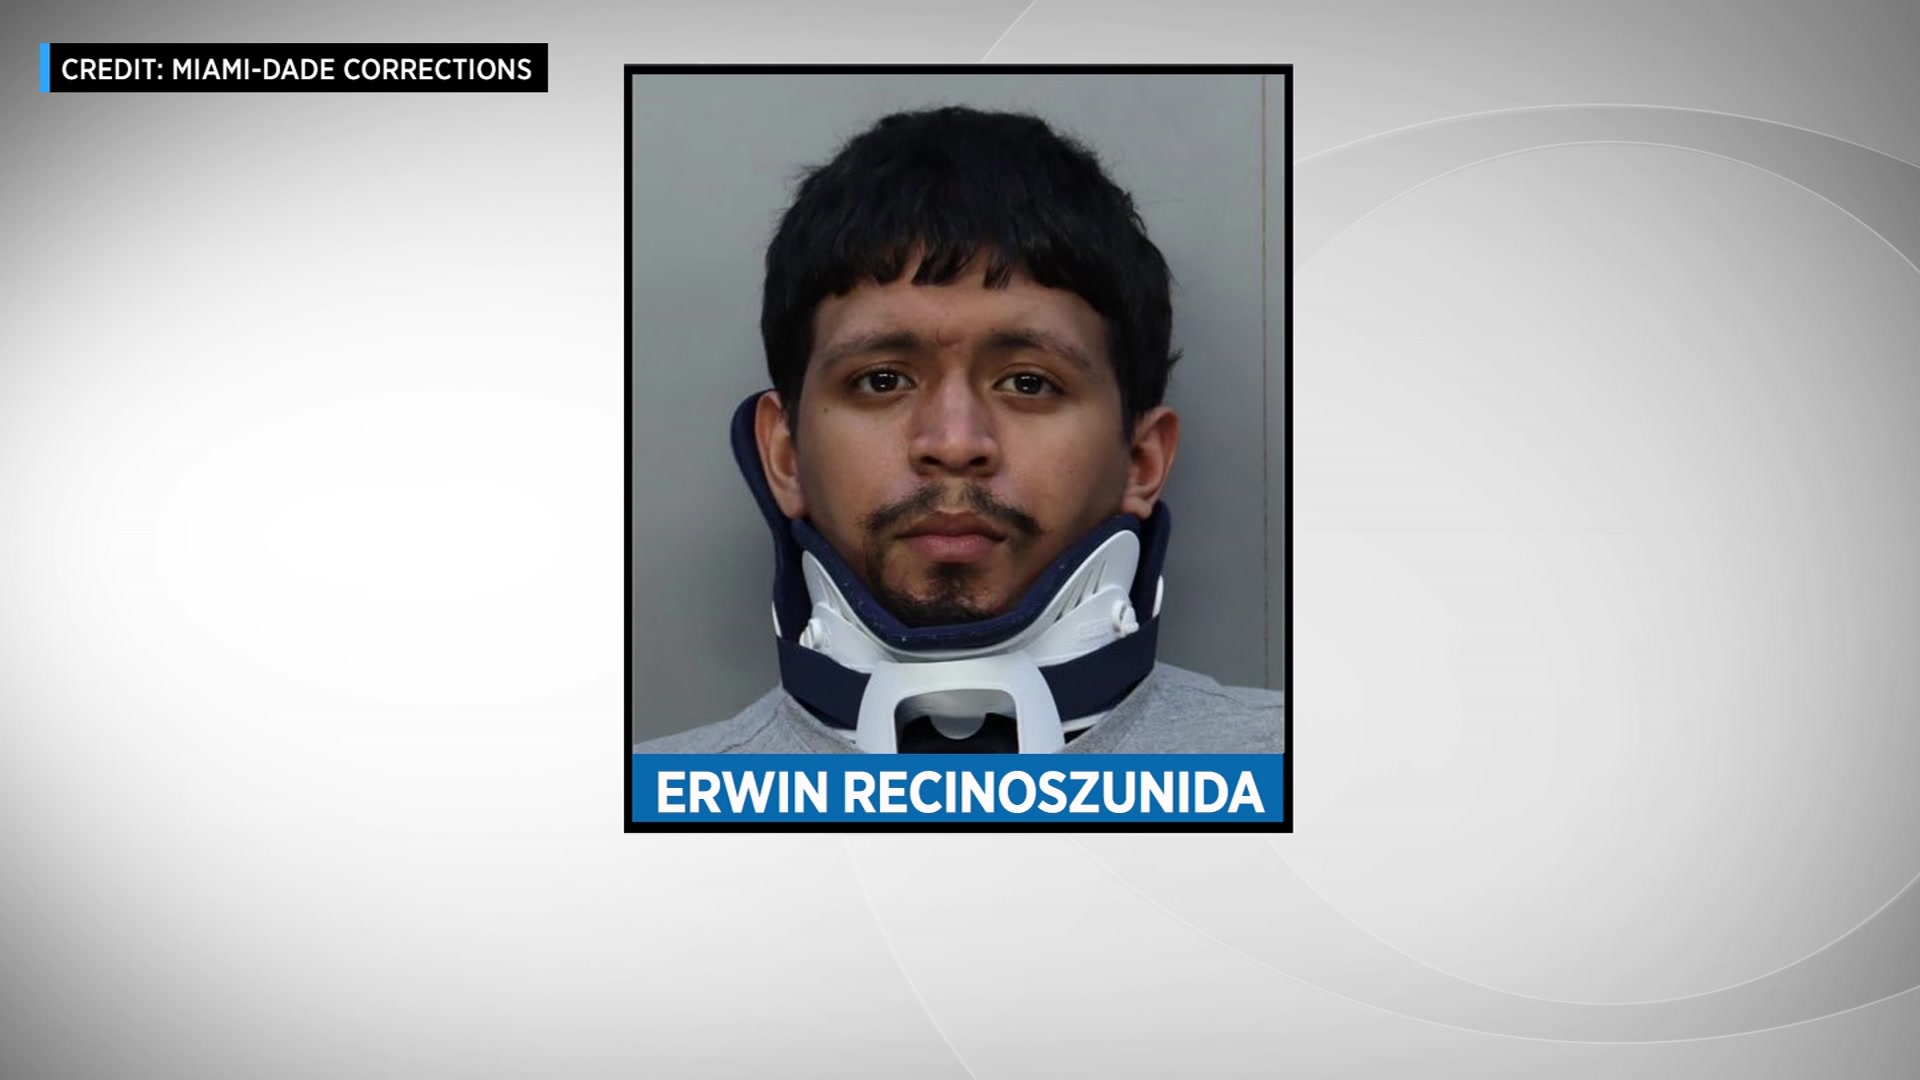 CBS4 Exclusive: Man Charged With DUI Manslaughter, Vehicular Homicide In Violent Miami Crash